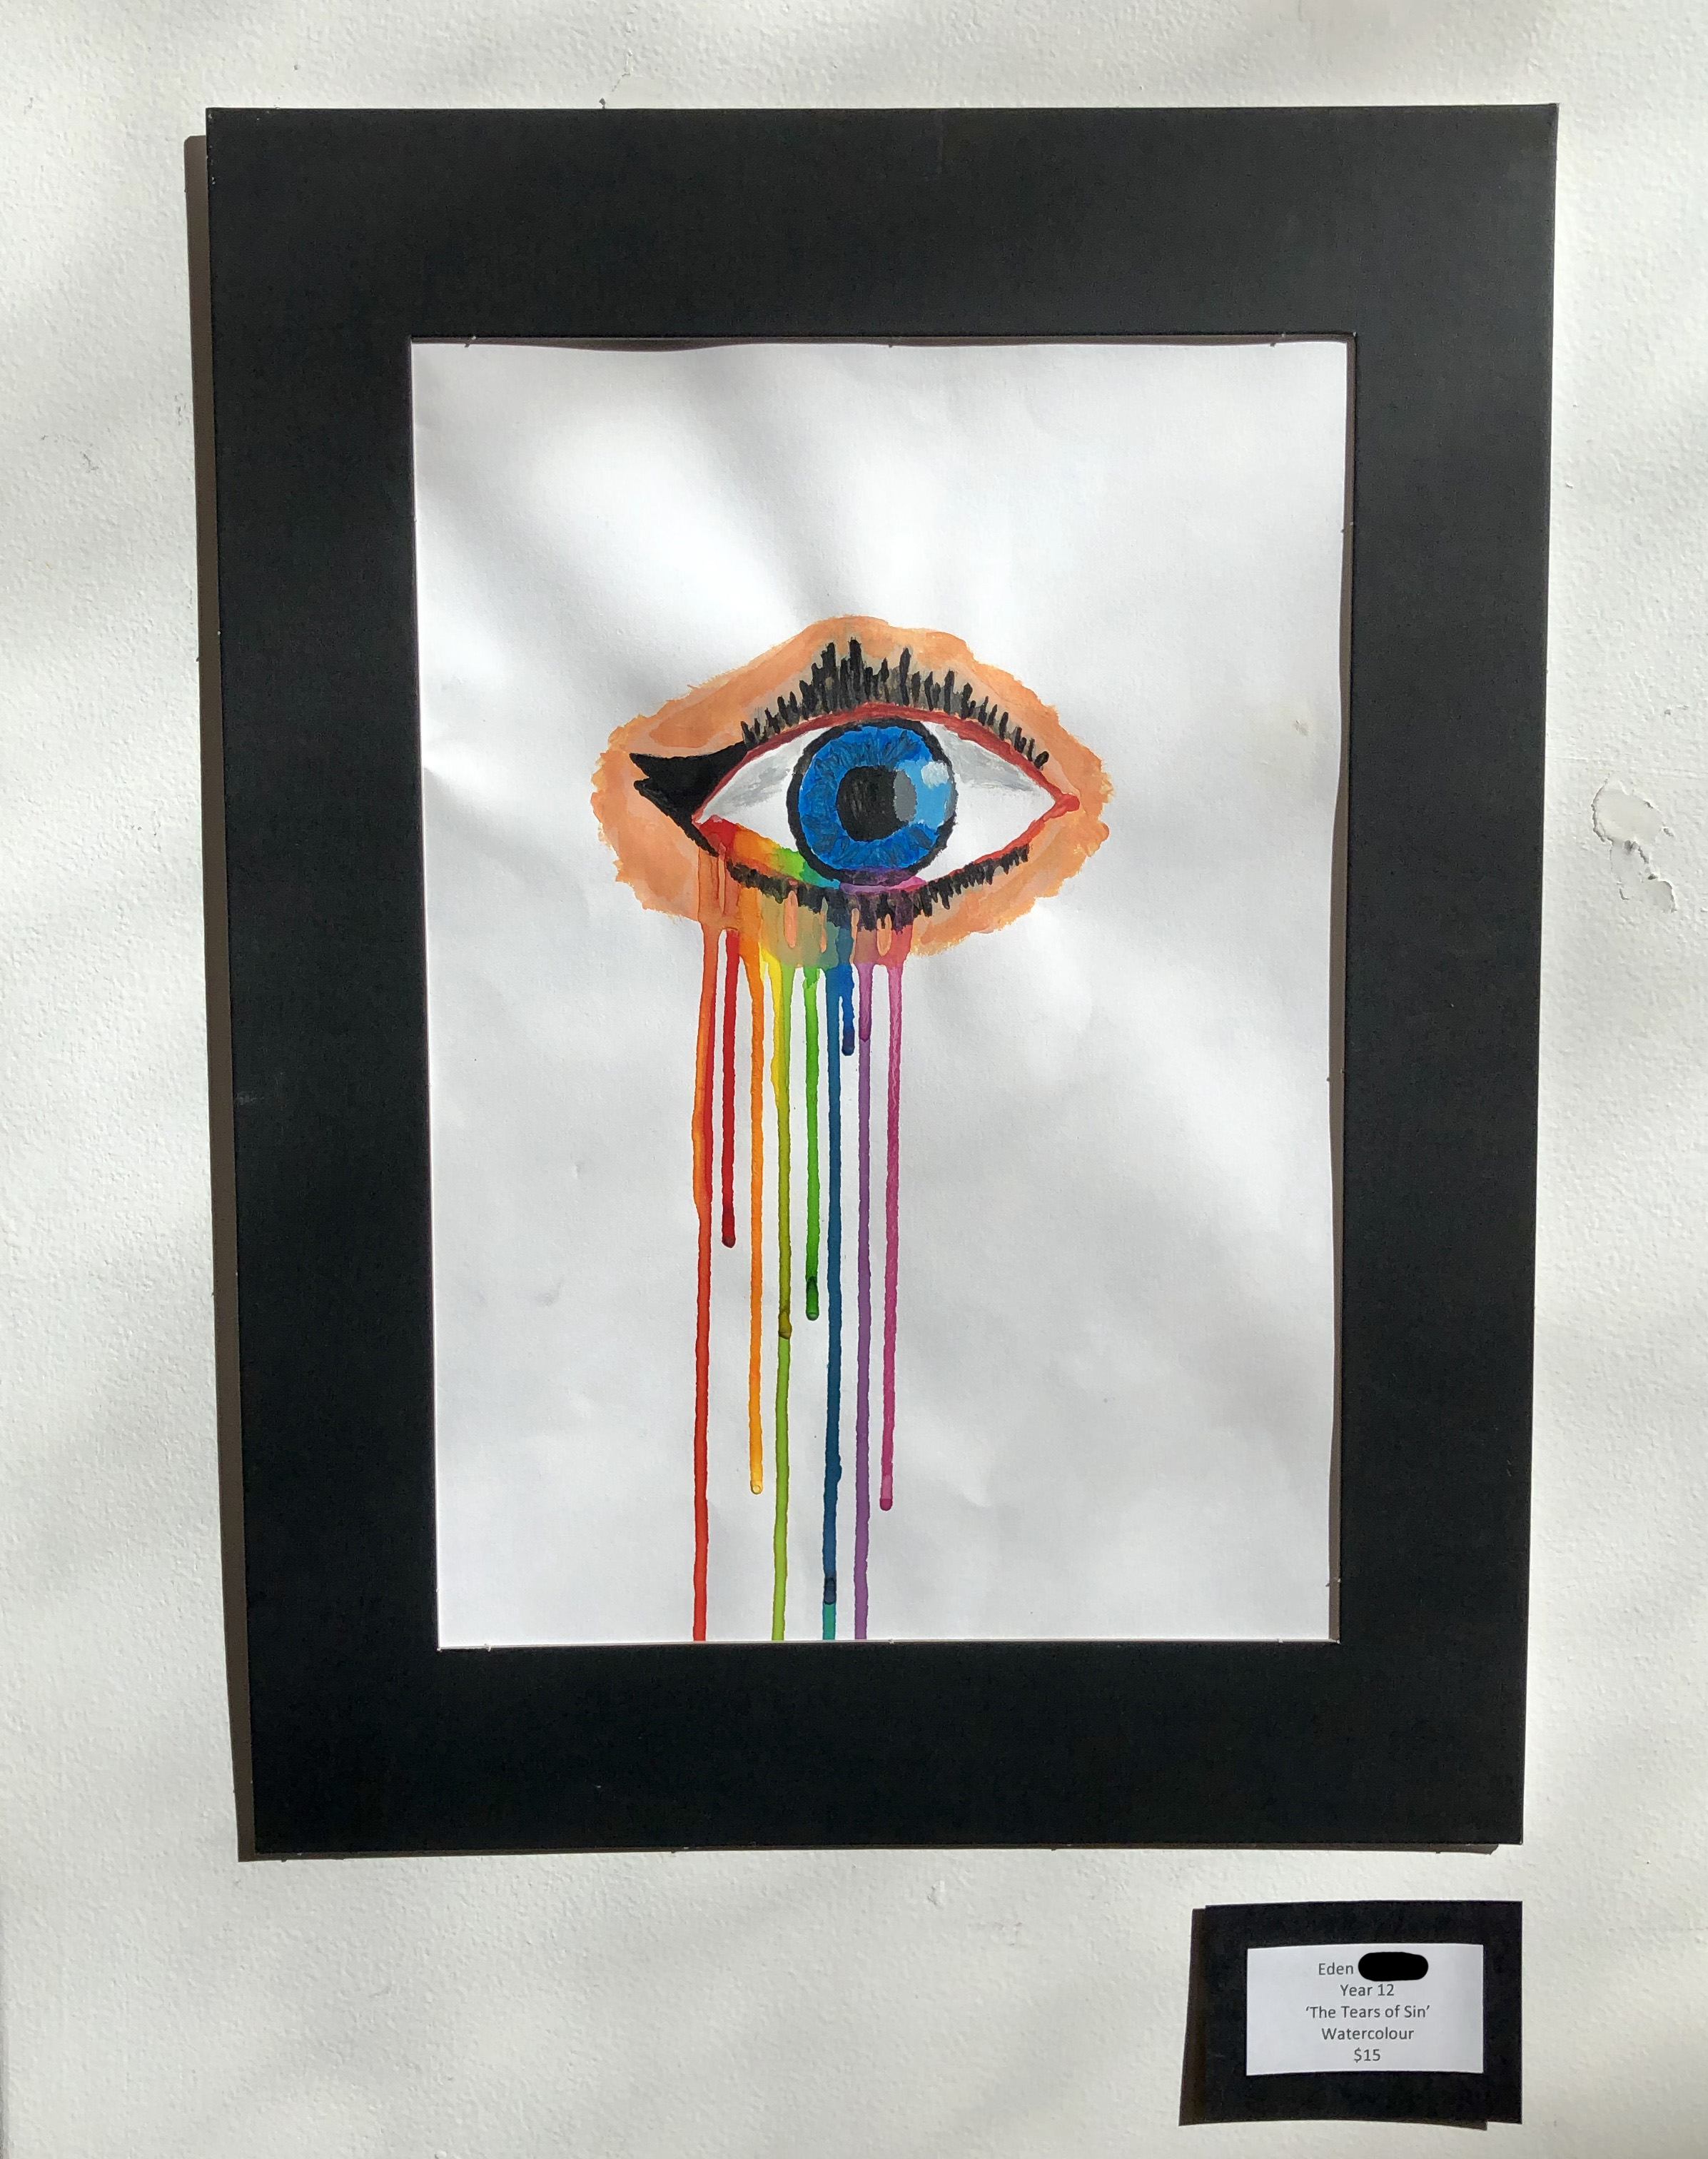 "The tears of Sin" by Eden (Year 12)